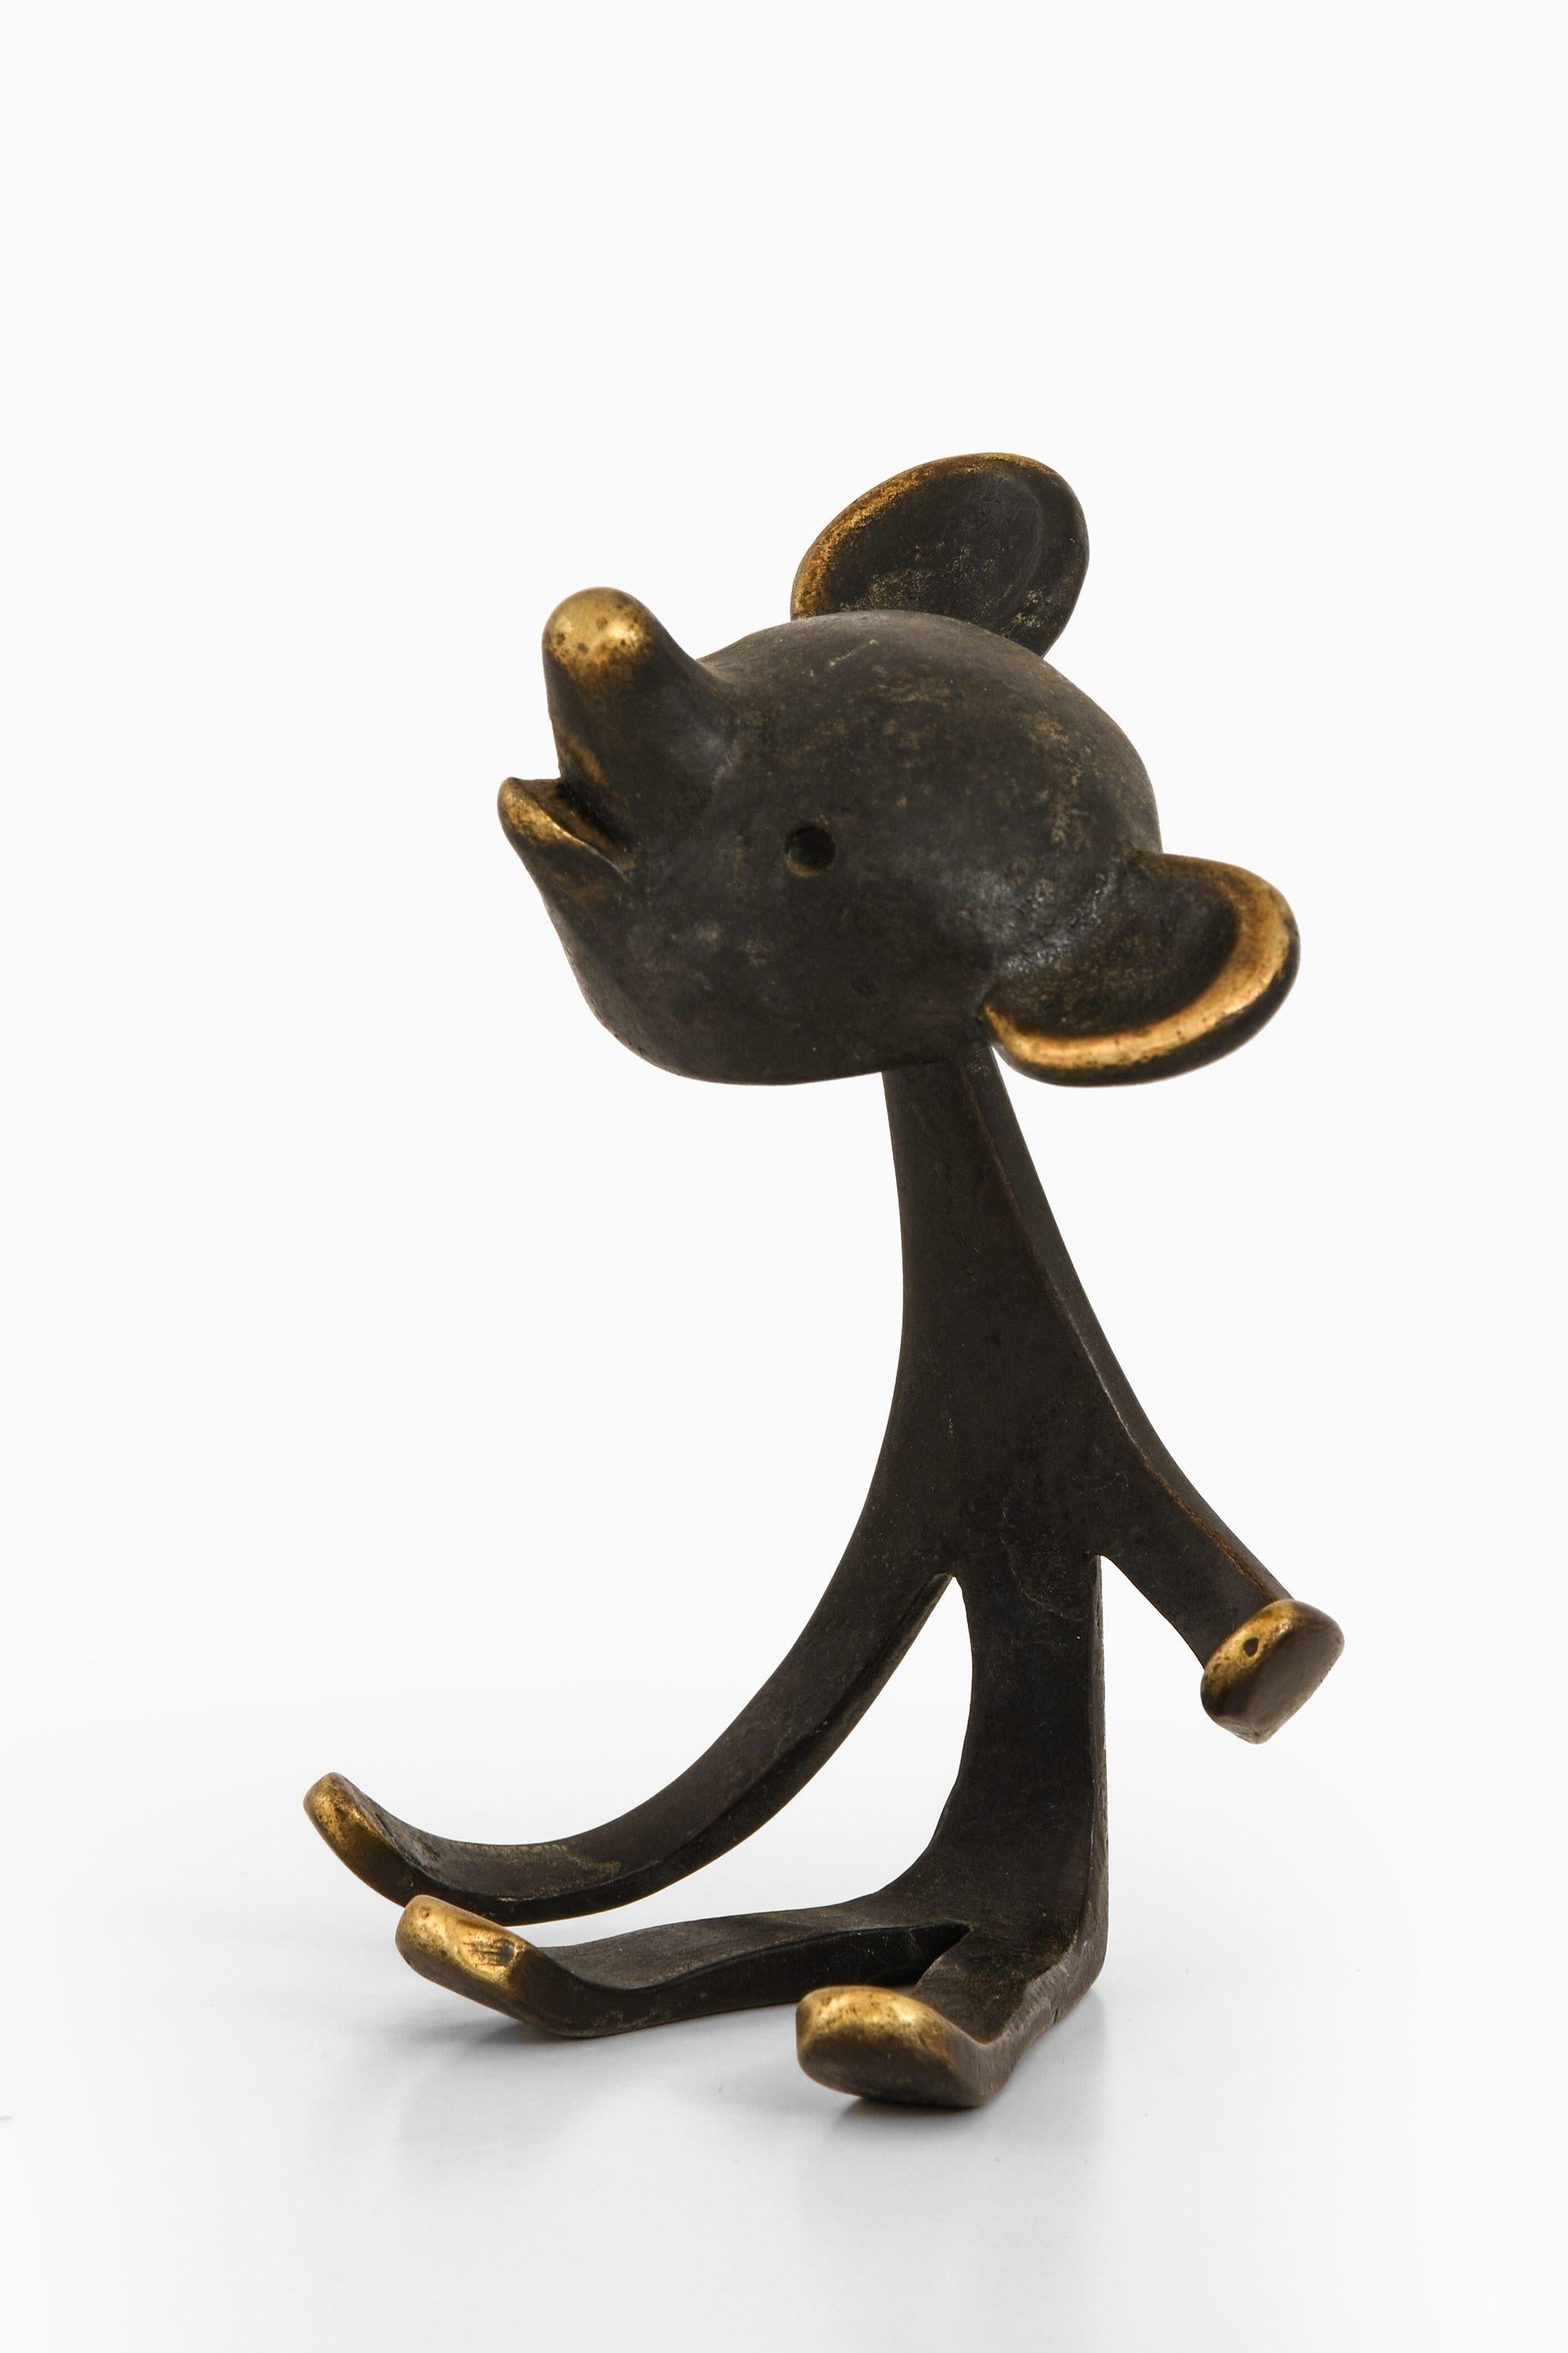 Bear Figurine Sculpture / coat hanger in Brass by Walter Bosse, 1950's

Additional Information:
Material: Brass
Style: Mid century, Europe
Produced by Hertha Baller in Austria
Dimensions (W x D x H): 8.5 x 6.5 x 11.5 cm
Condition: Good vintage